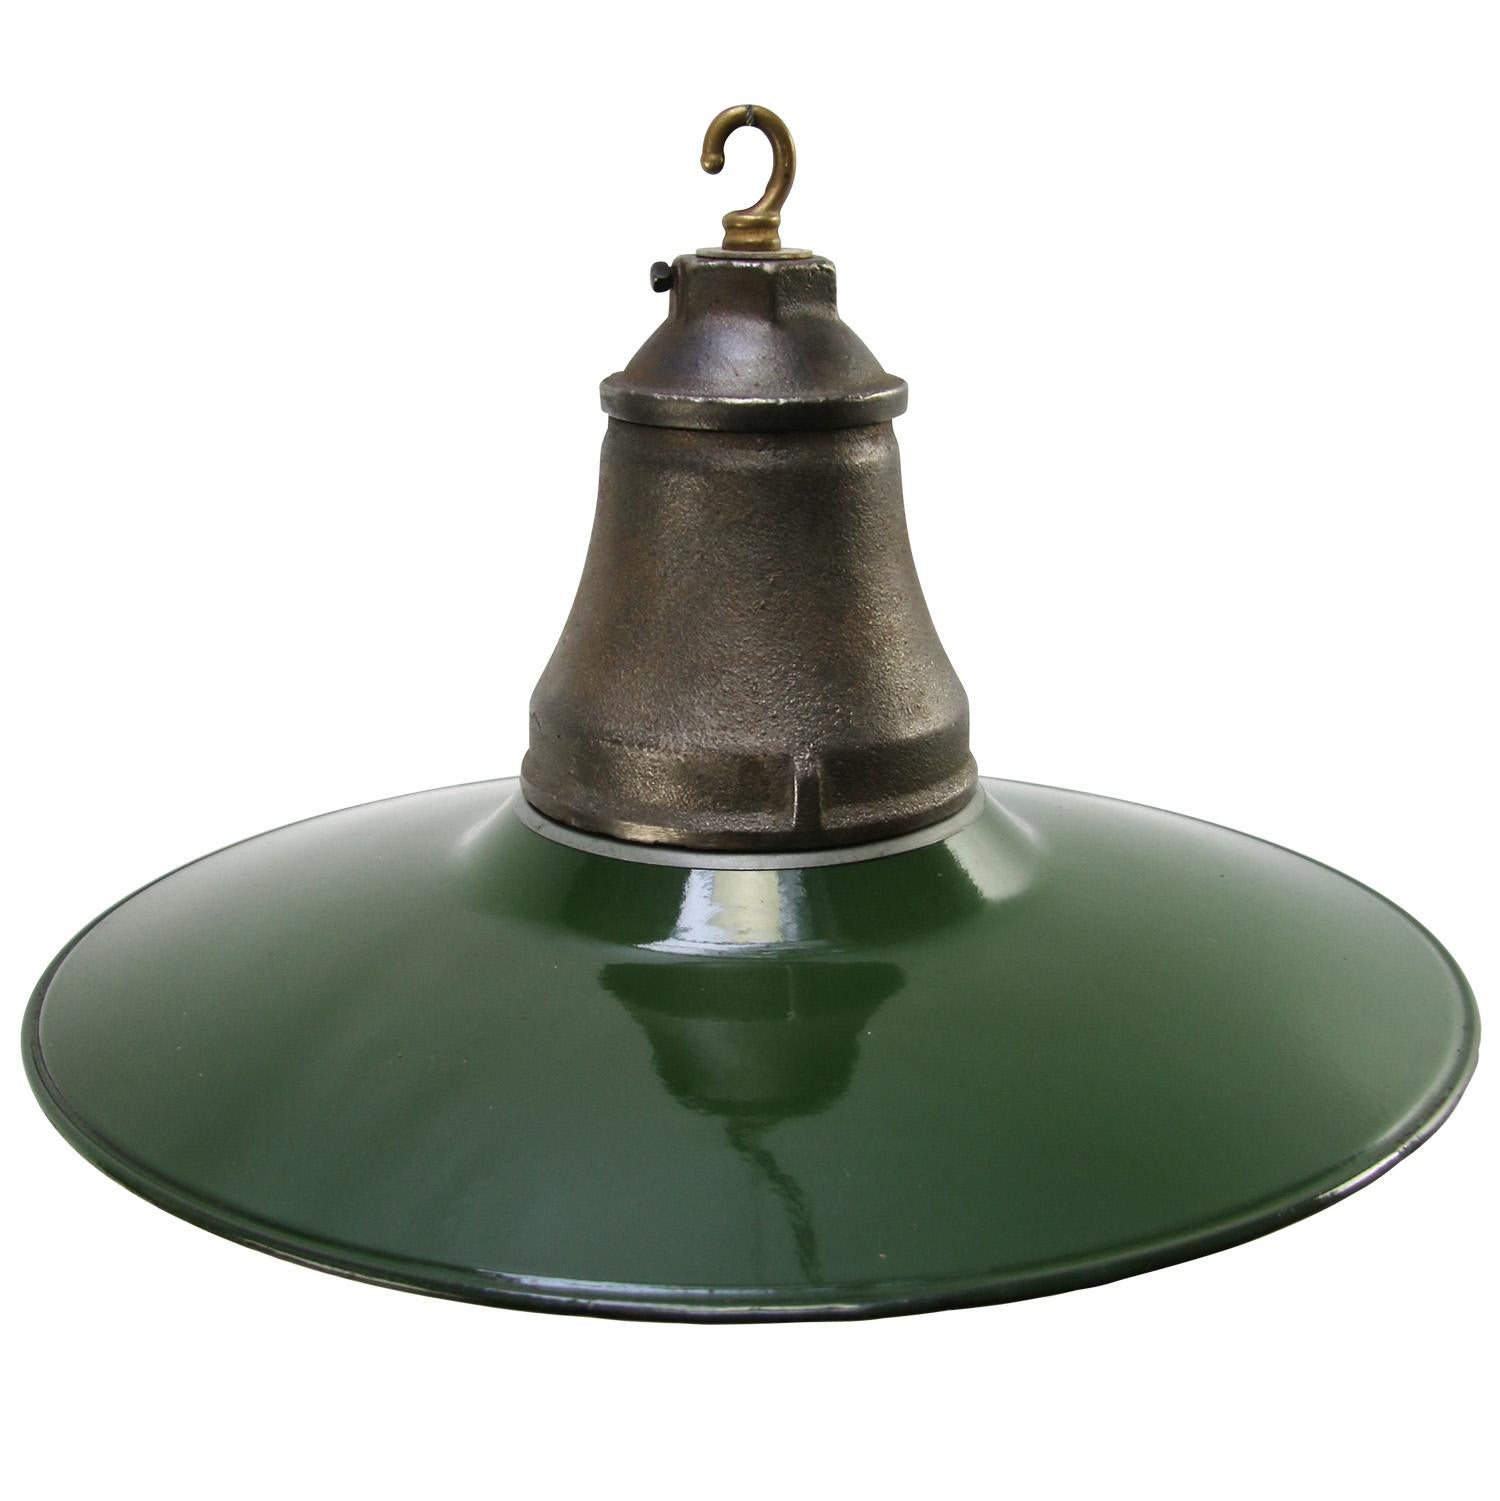 American Industrial factory pendant light
Green enamel white interior.
Clear glass, cast iron top

Weight 4.00 kg / 8.8 lb

Priced per individual item. All lamps have been made suitable by international standards for incandescent light bulbs,